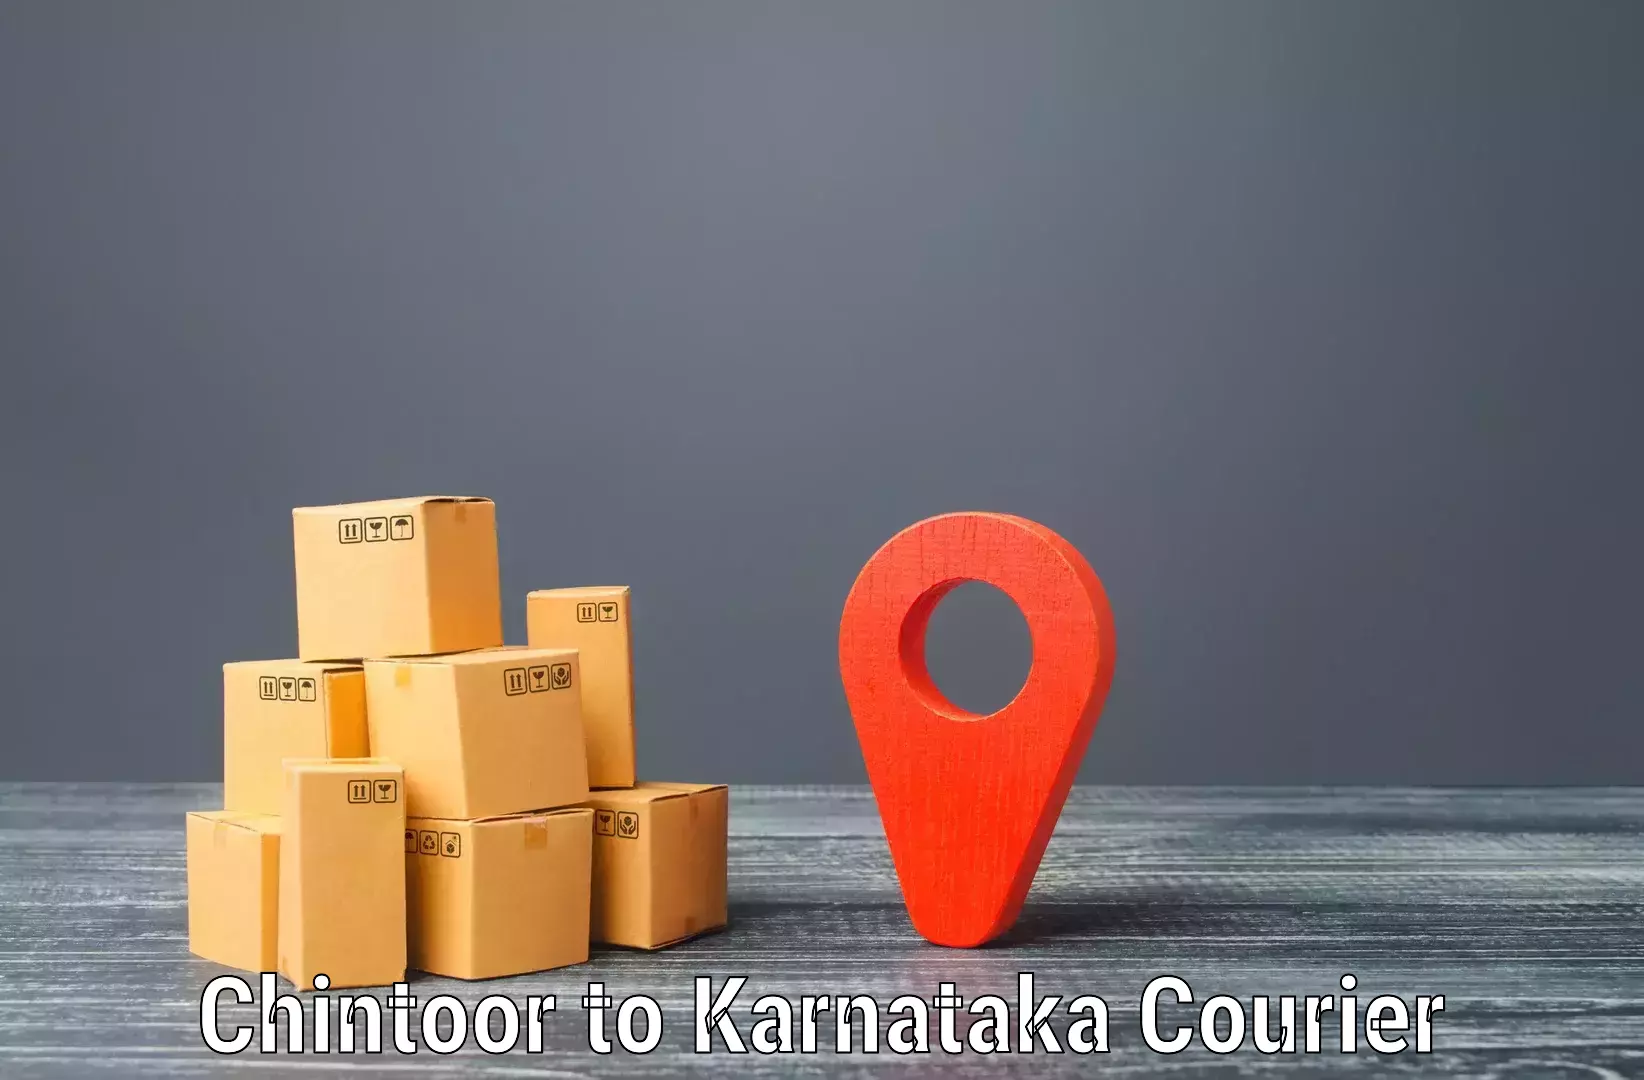 Quality courier services Chintoor to Ullal